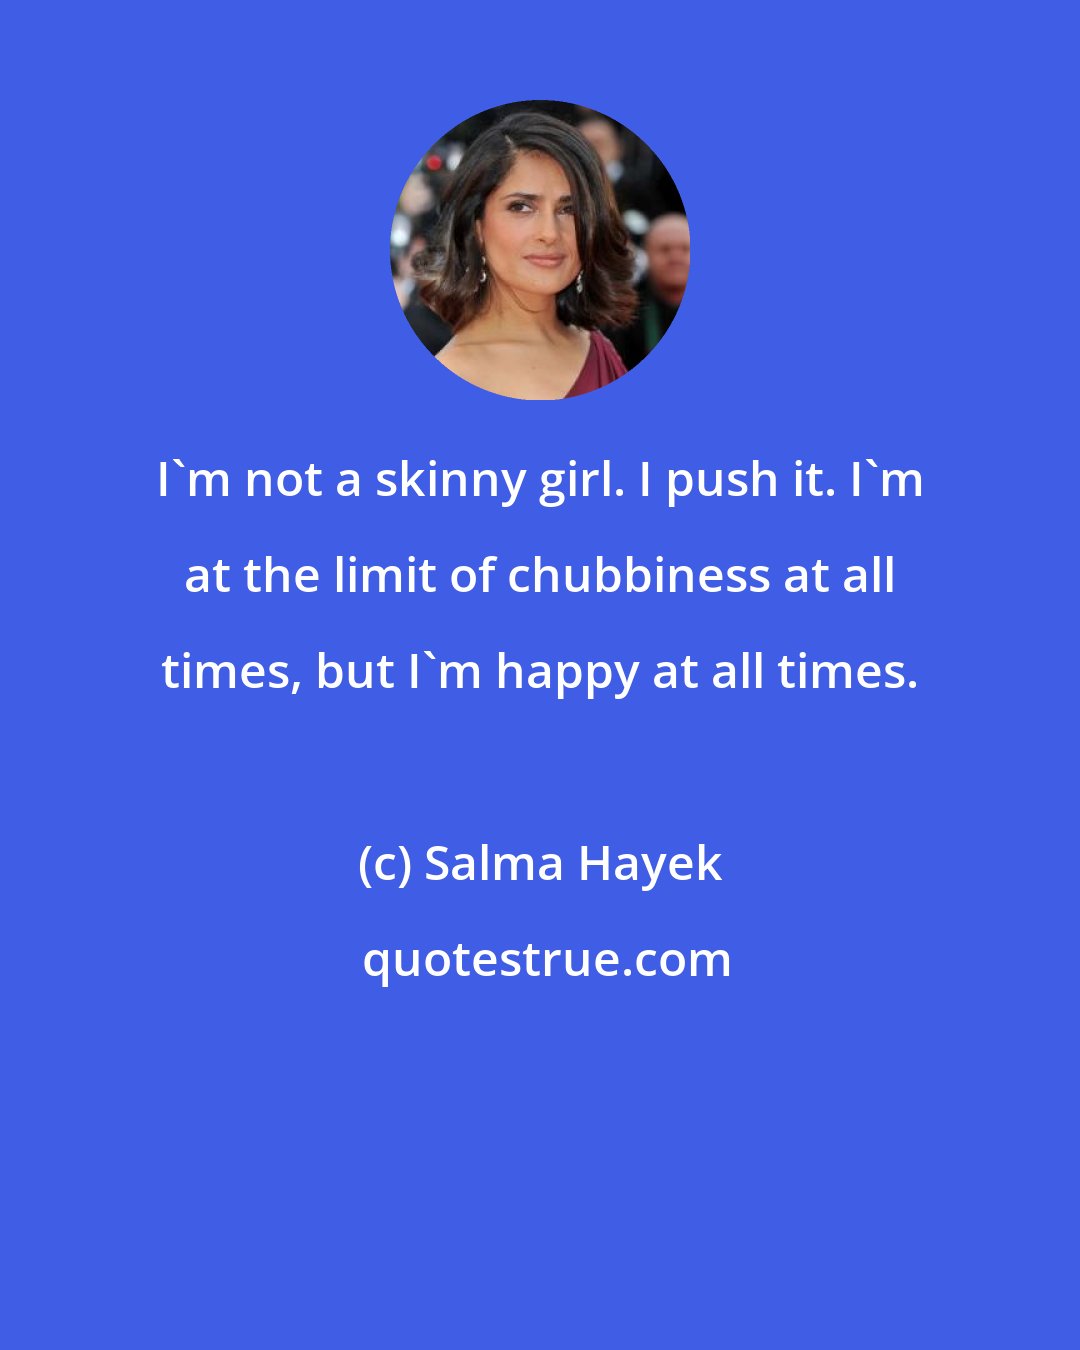 Salma Hayek: I'm not a skinny girl. I push it. I'm at the limit of chubbiness at all times, but I'm happy at all times.